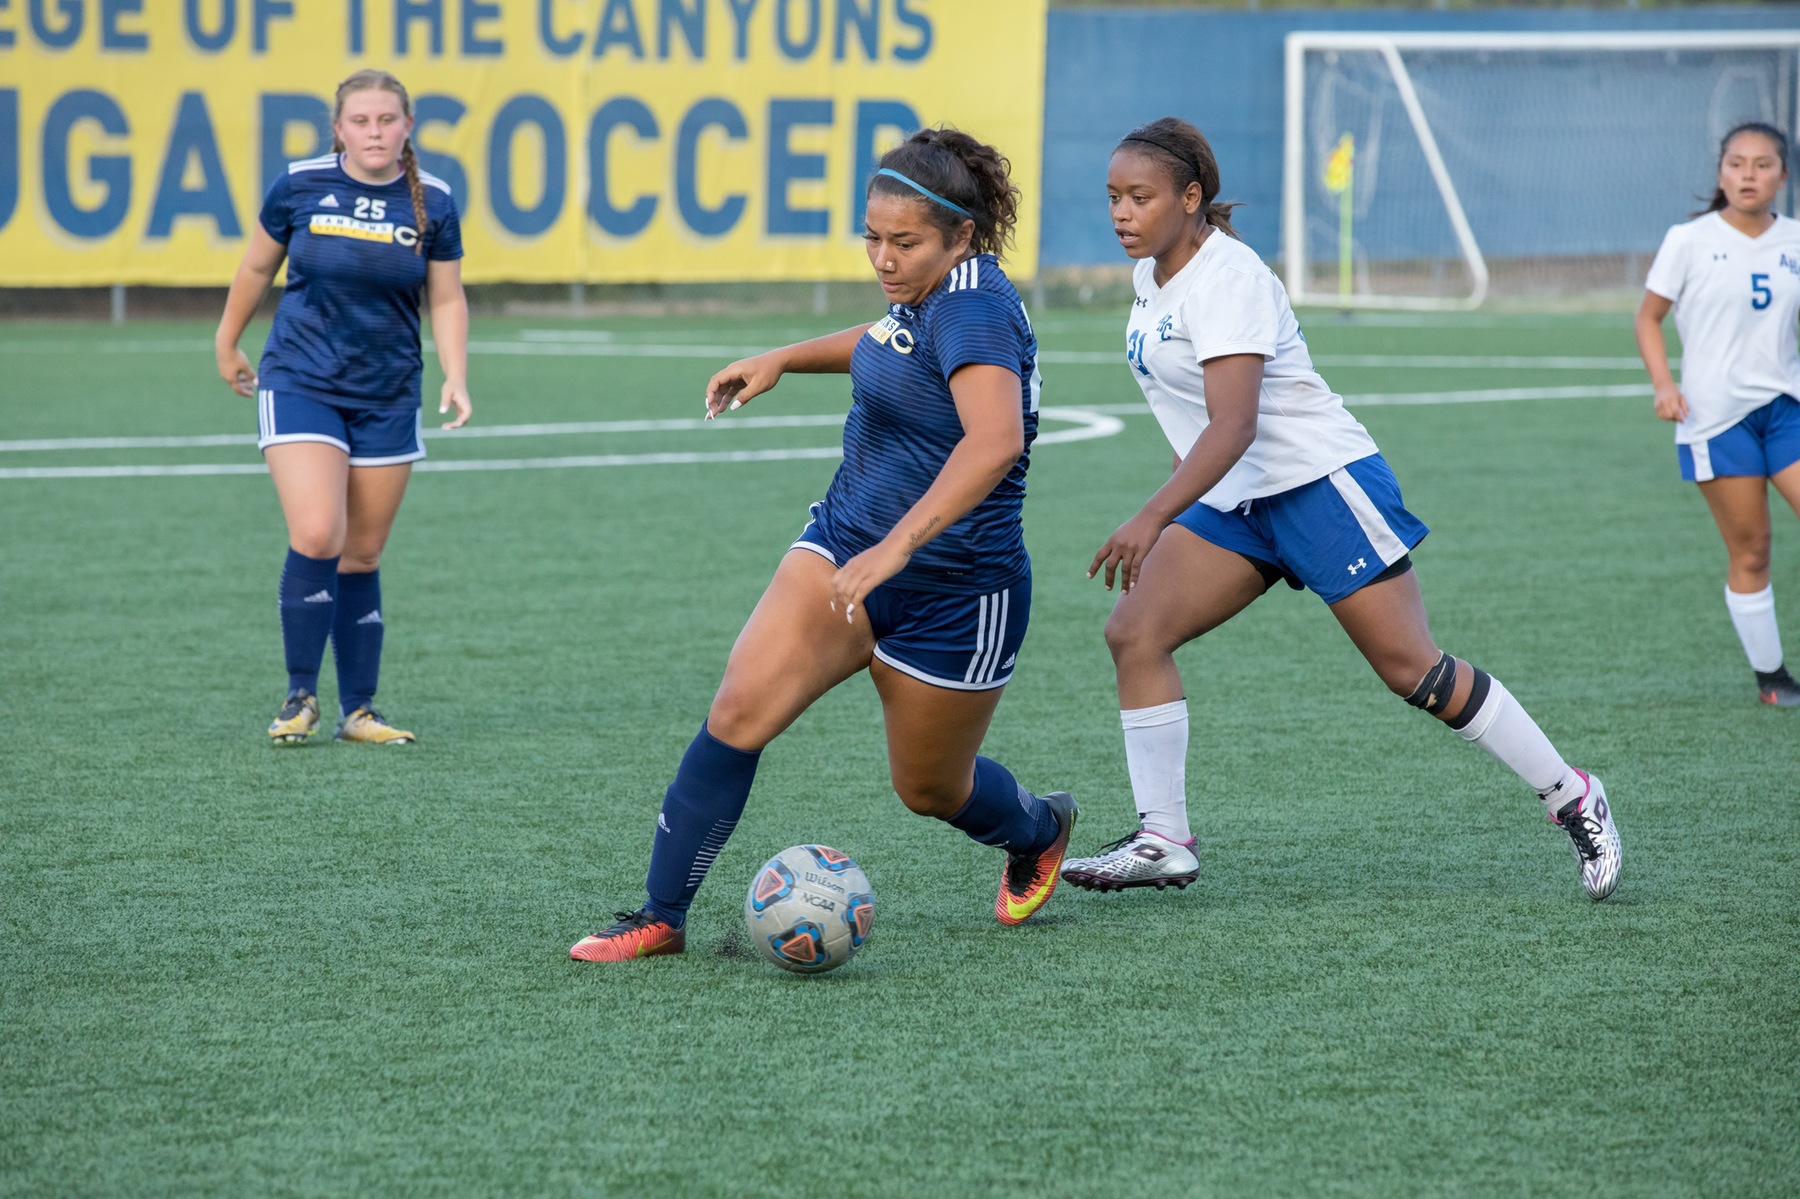 College of the Canyons freshman forward Corina Sagato was one of three Cougars to score two goals in the match vs. Allan Hancock College. Jacob Velarde/COC Sports Information.